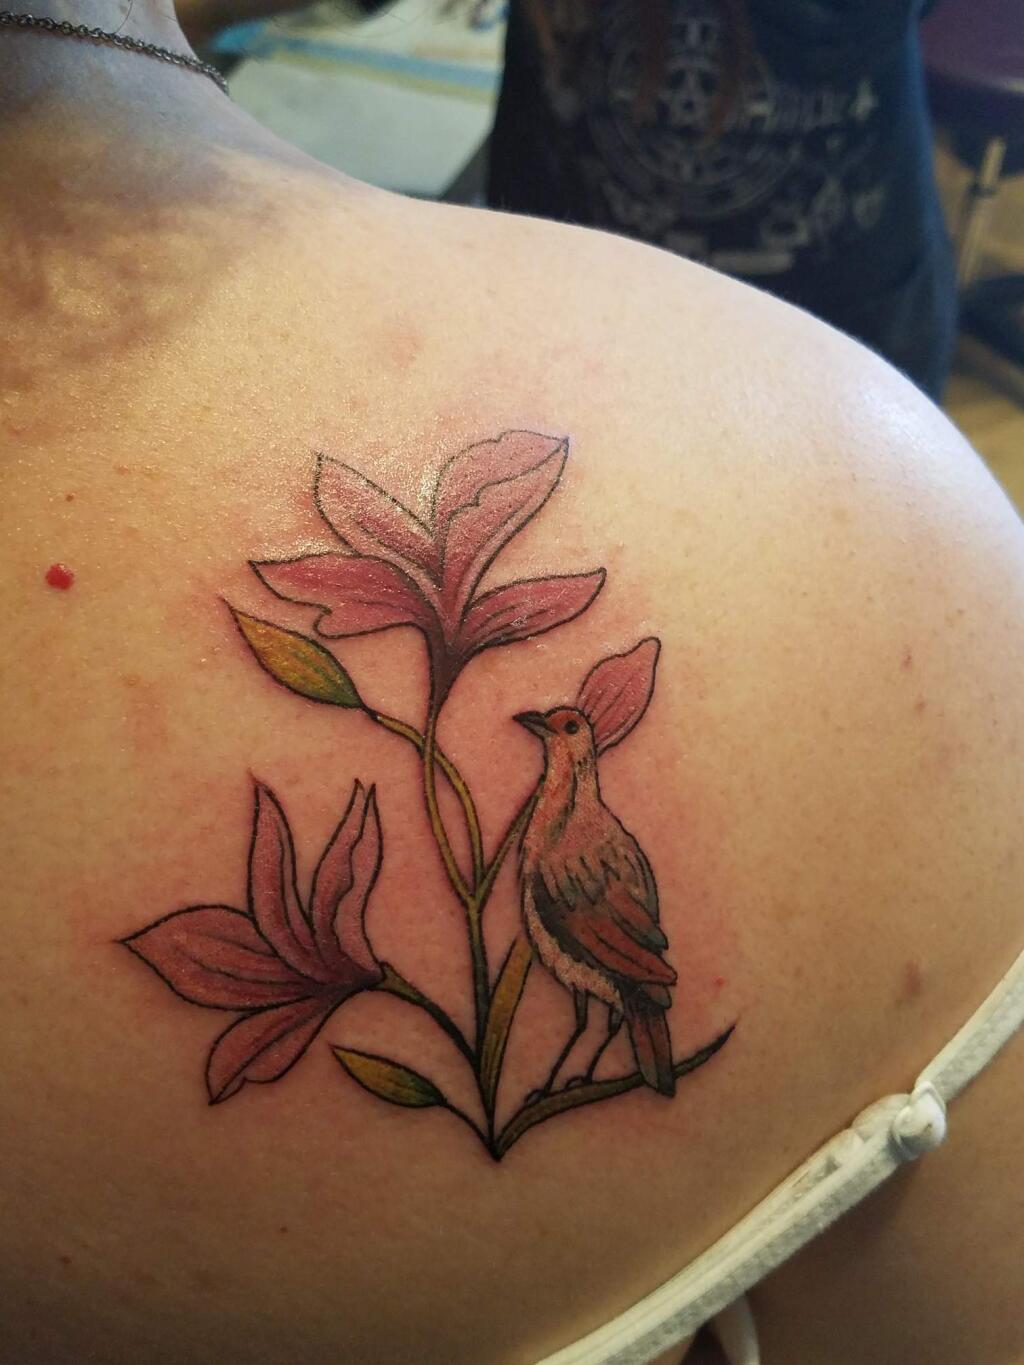 Diana Butler of Santa Rosa worked with Jen at Valkyrie Tattoo in Penngrove for this tattoo, a representation of her grandfathers. ' I really wanted to include both of my grandfathers in walking me down the aisle on my wedding day. Unfortunately, I lost one to cancer before that could happen,' she wrote. 'The plumeria for one, from Nicaragua. The Rufous hornero bird for the other, from Argentina.' (Diana Butler)